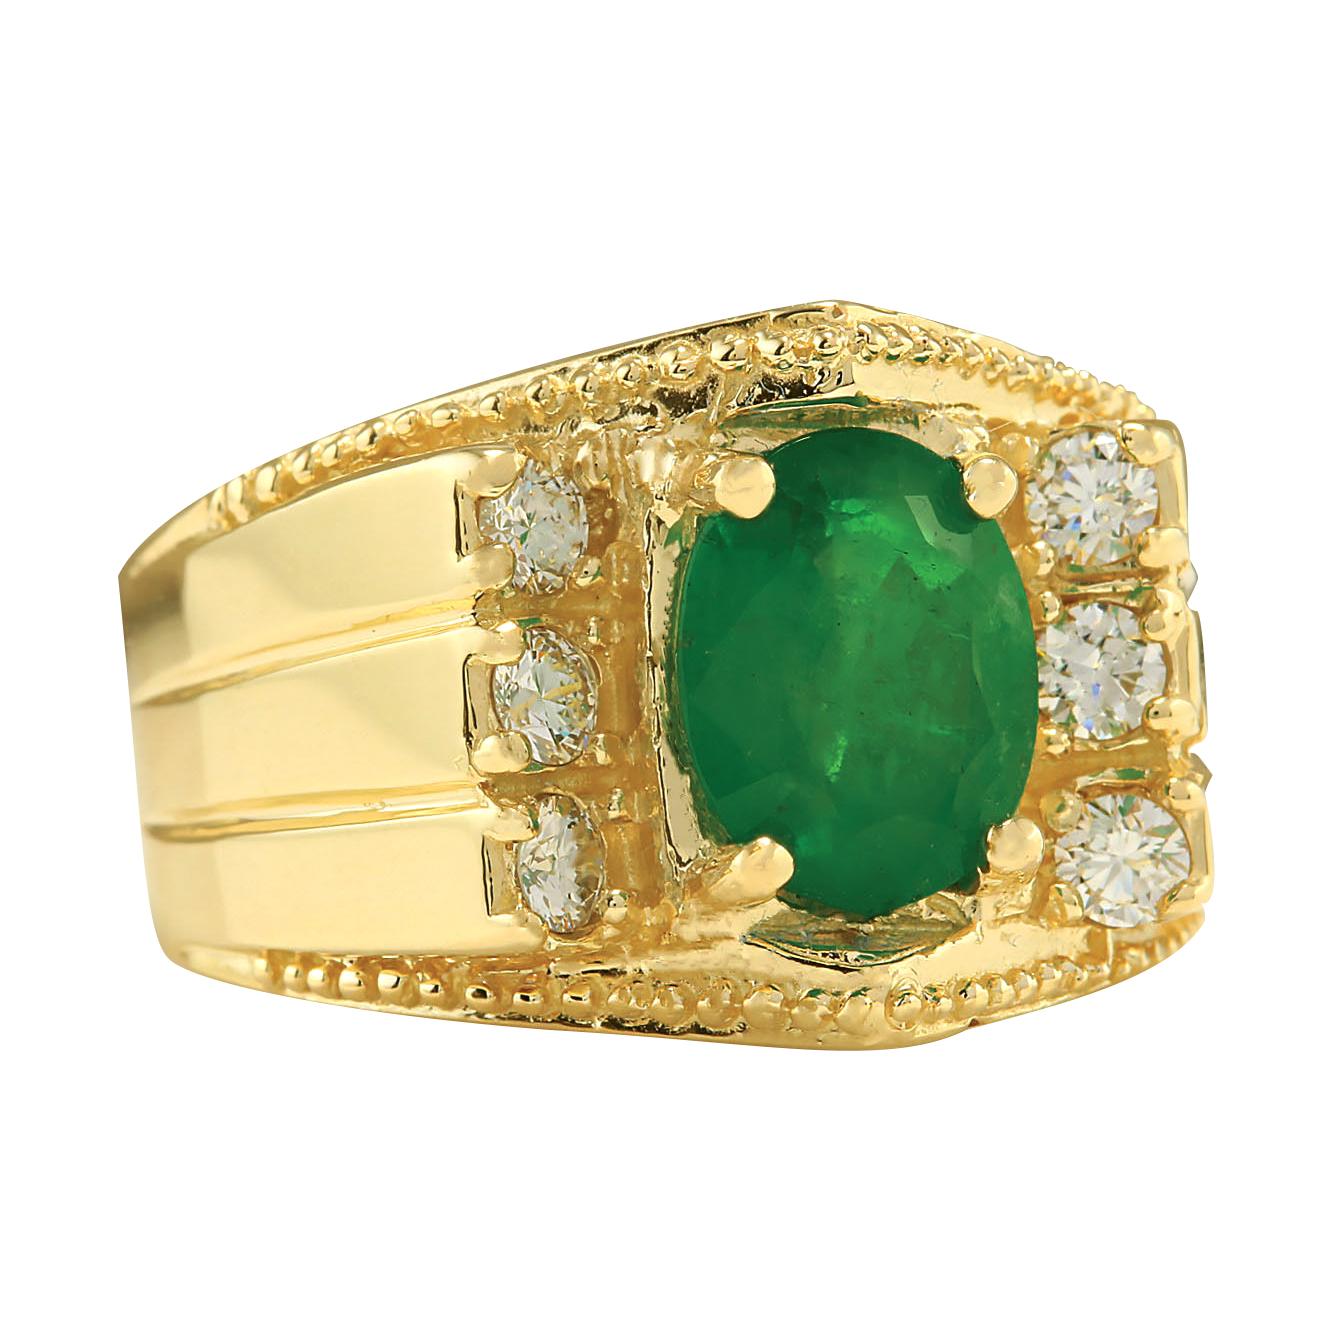 Stamped: 14K Yellow Gold
Total Ring Weight: 12.4 Grams
Total Natural Emerald Weight is 2.27 Carat (Measures: 9.00x7.00 mm)
Color: Green
Total Natural Diamond Weight is 0.60 Carat
Color: F-G, Clarity: VS2-SI1
Face Measures: 15.20x16.80 mm
Sku: